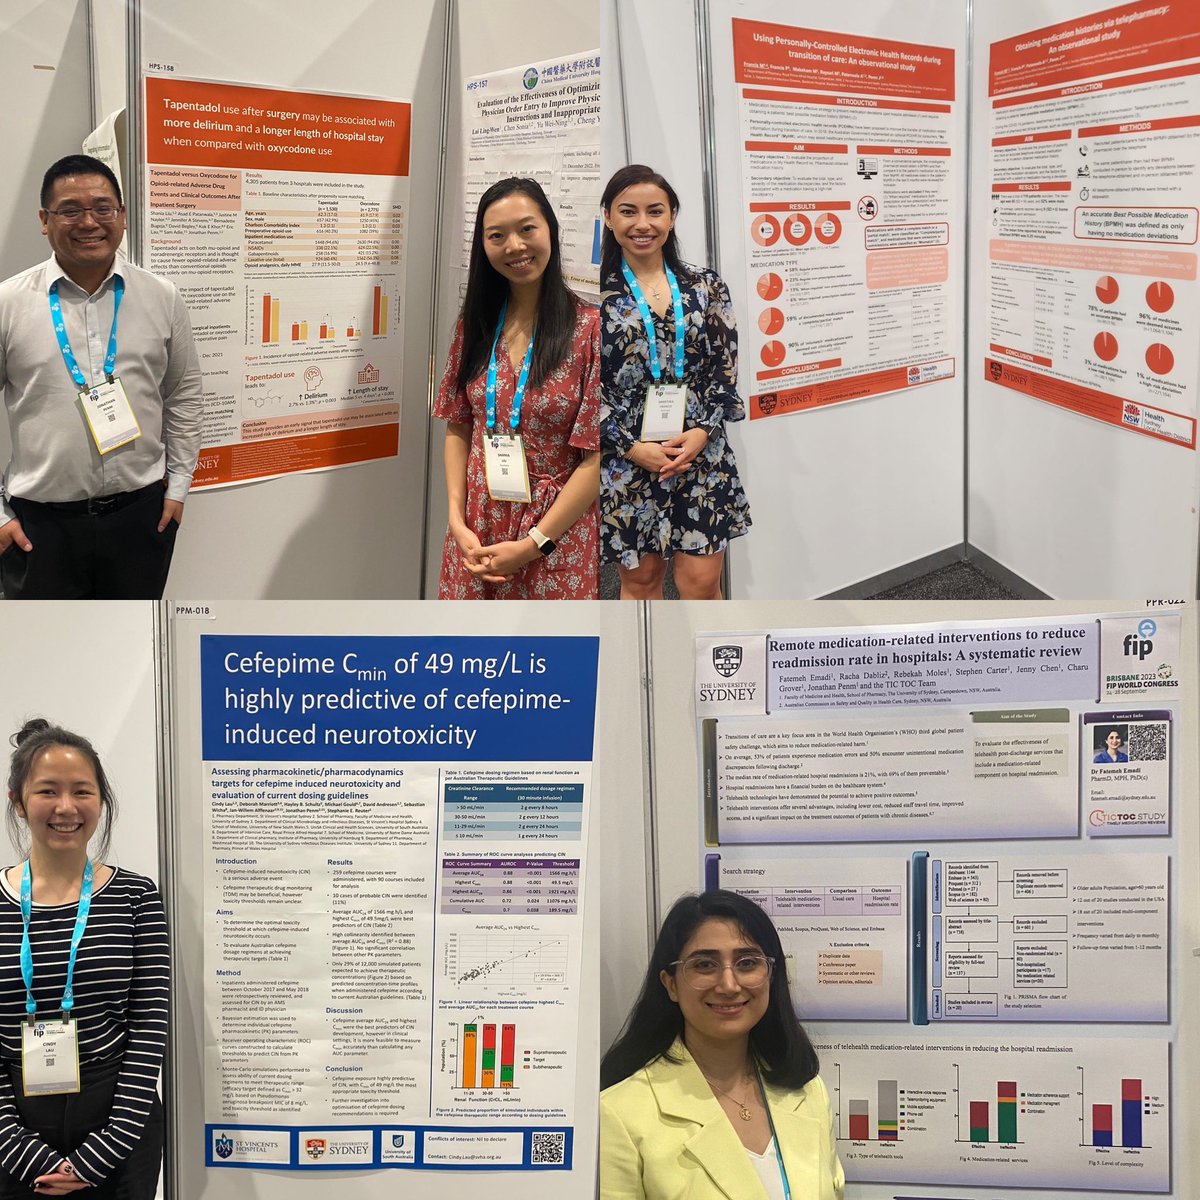 It was great seeing friends at #FIP2023 in Brisbane and having my team present their work. @ShaniaLiu_ @sidpatan @cindasaur90 @DRugby56 @FIP_org @FIP_HPS See you all next year in #SouthAfrica #FIPCongress